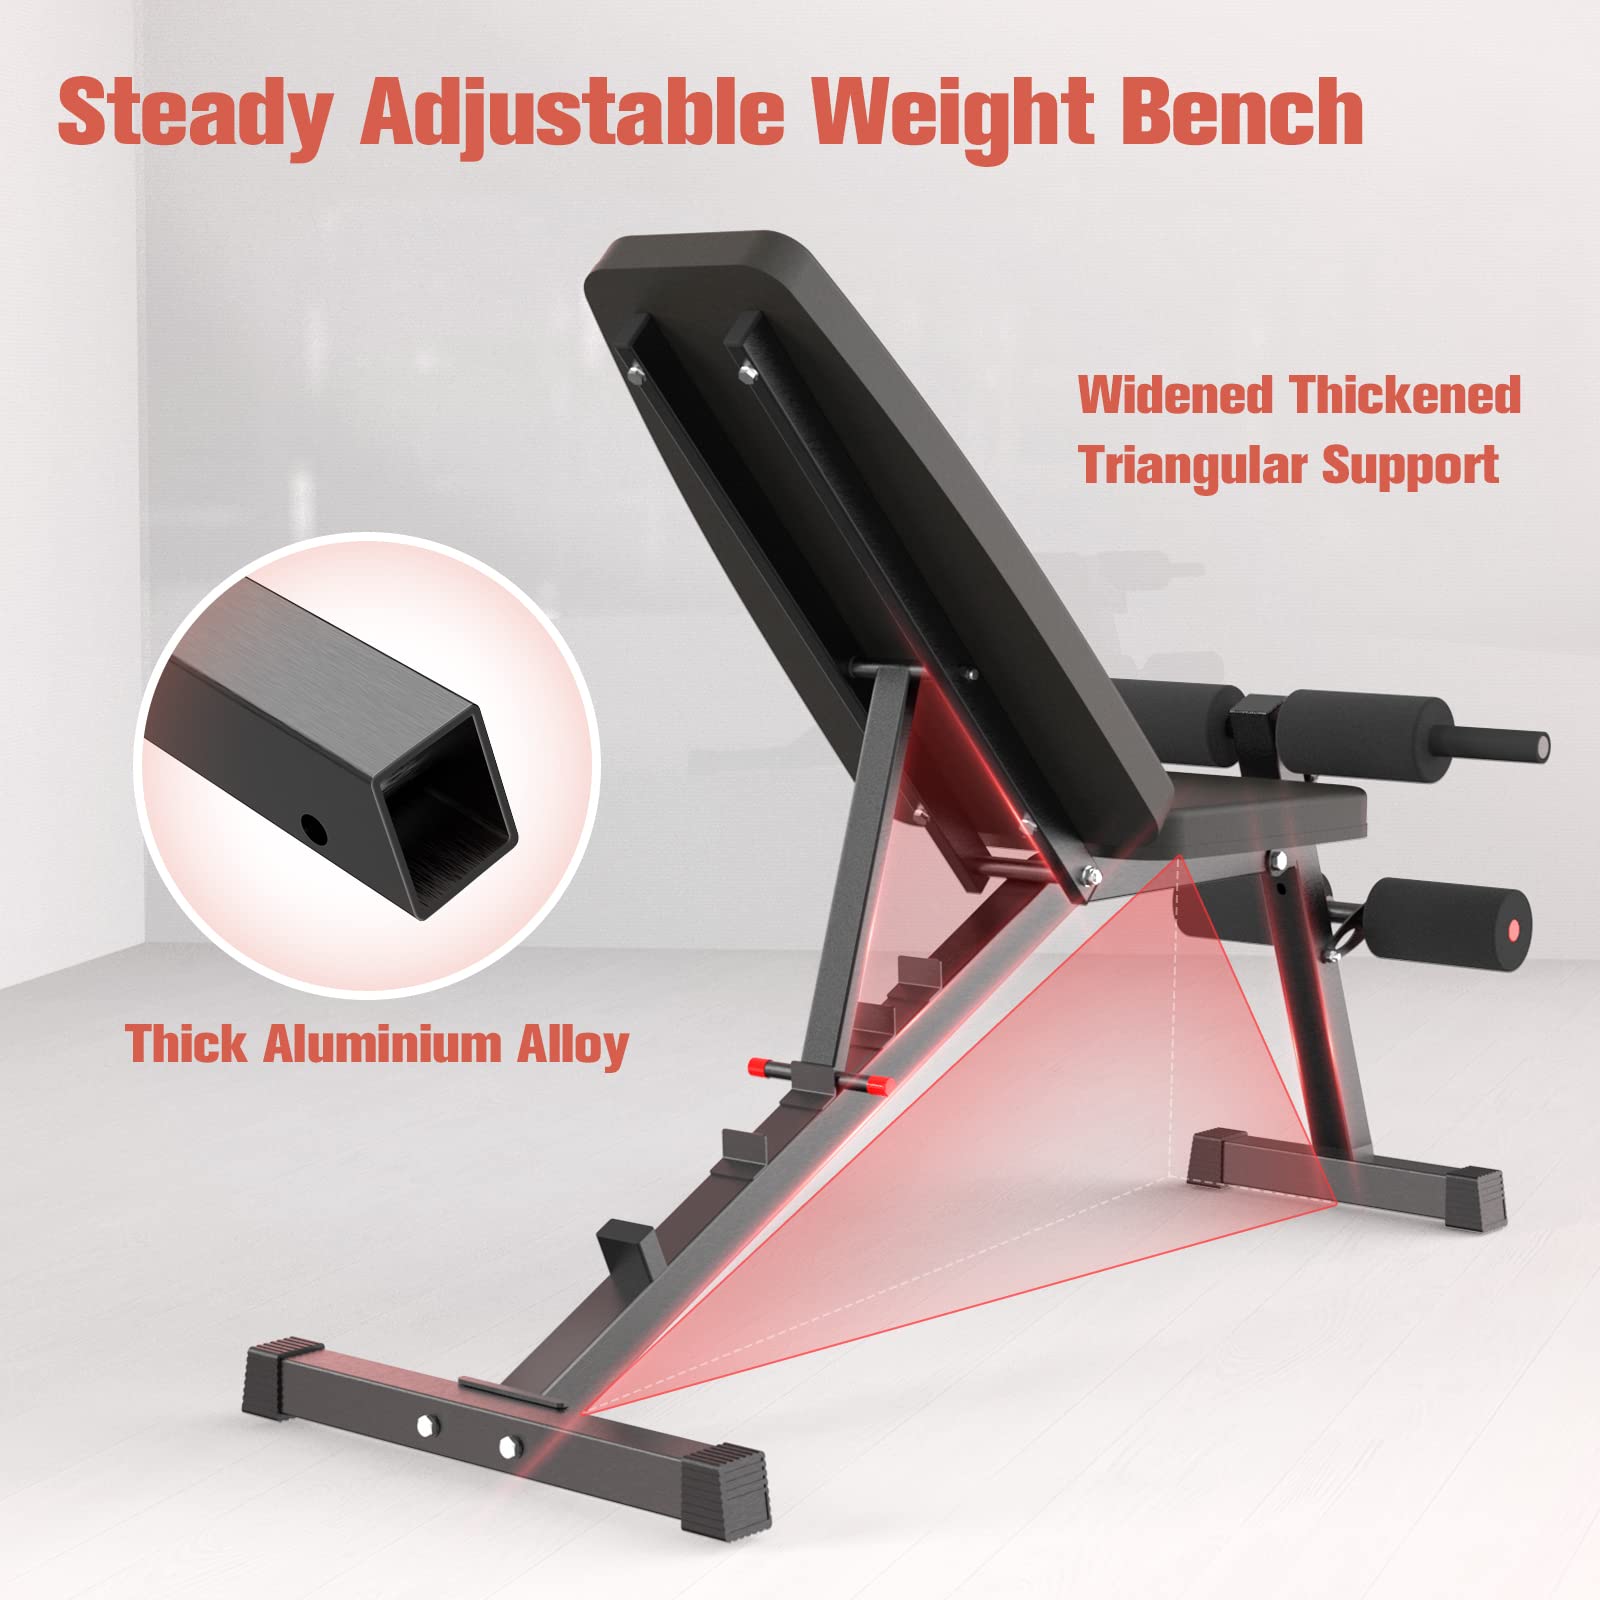 PITHAGE Adjustable Weight Bench 660lbs Weight Capacity Incline Decline Exercise Bench